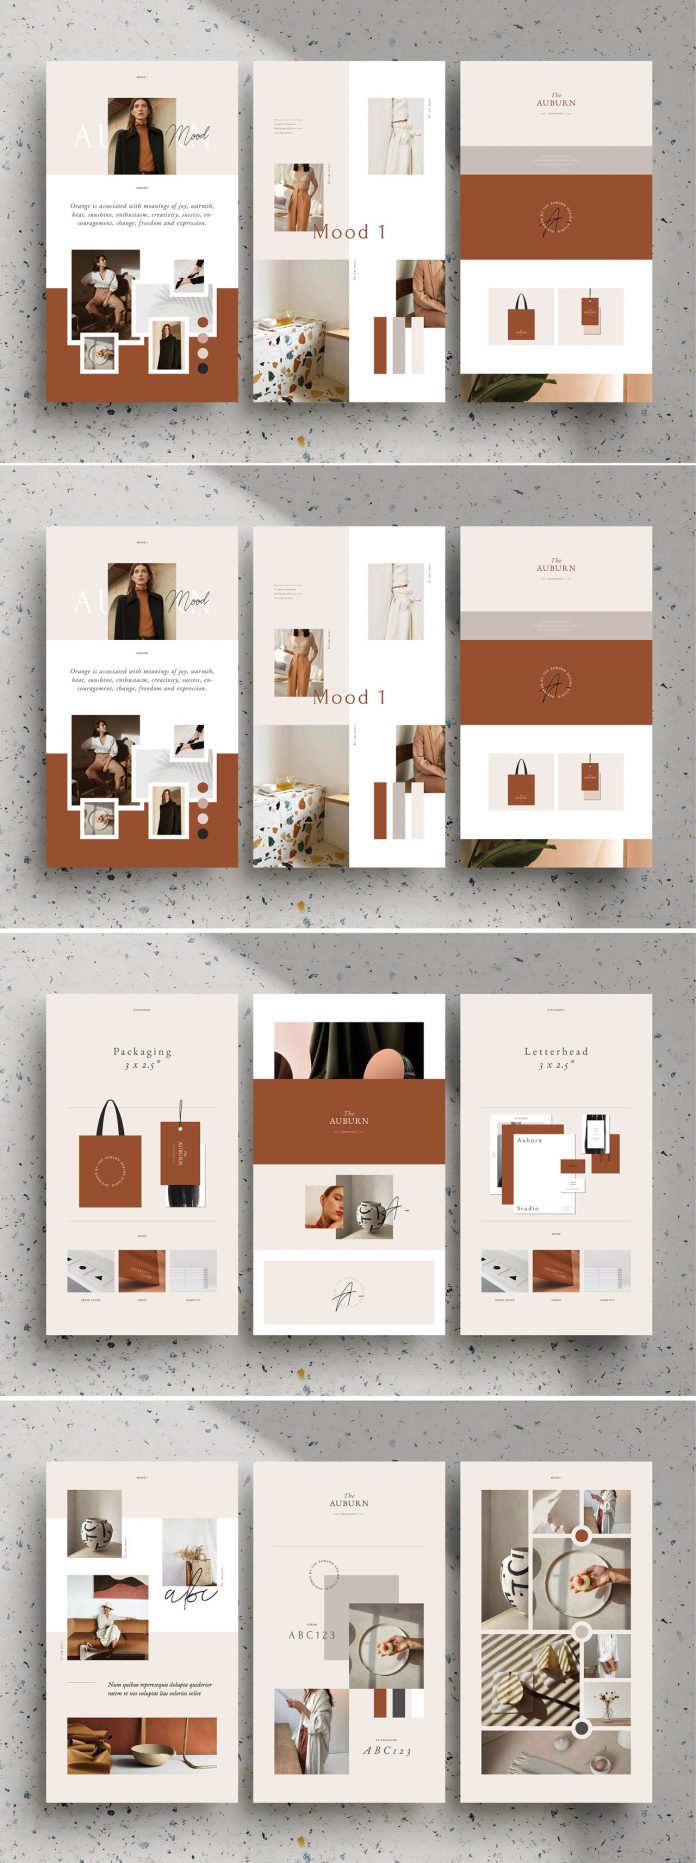 24 Adobe InDesign brand sheets template based on modern and minimalist graphic design.